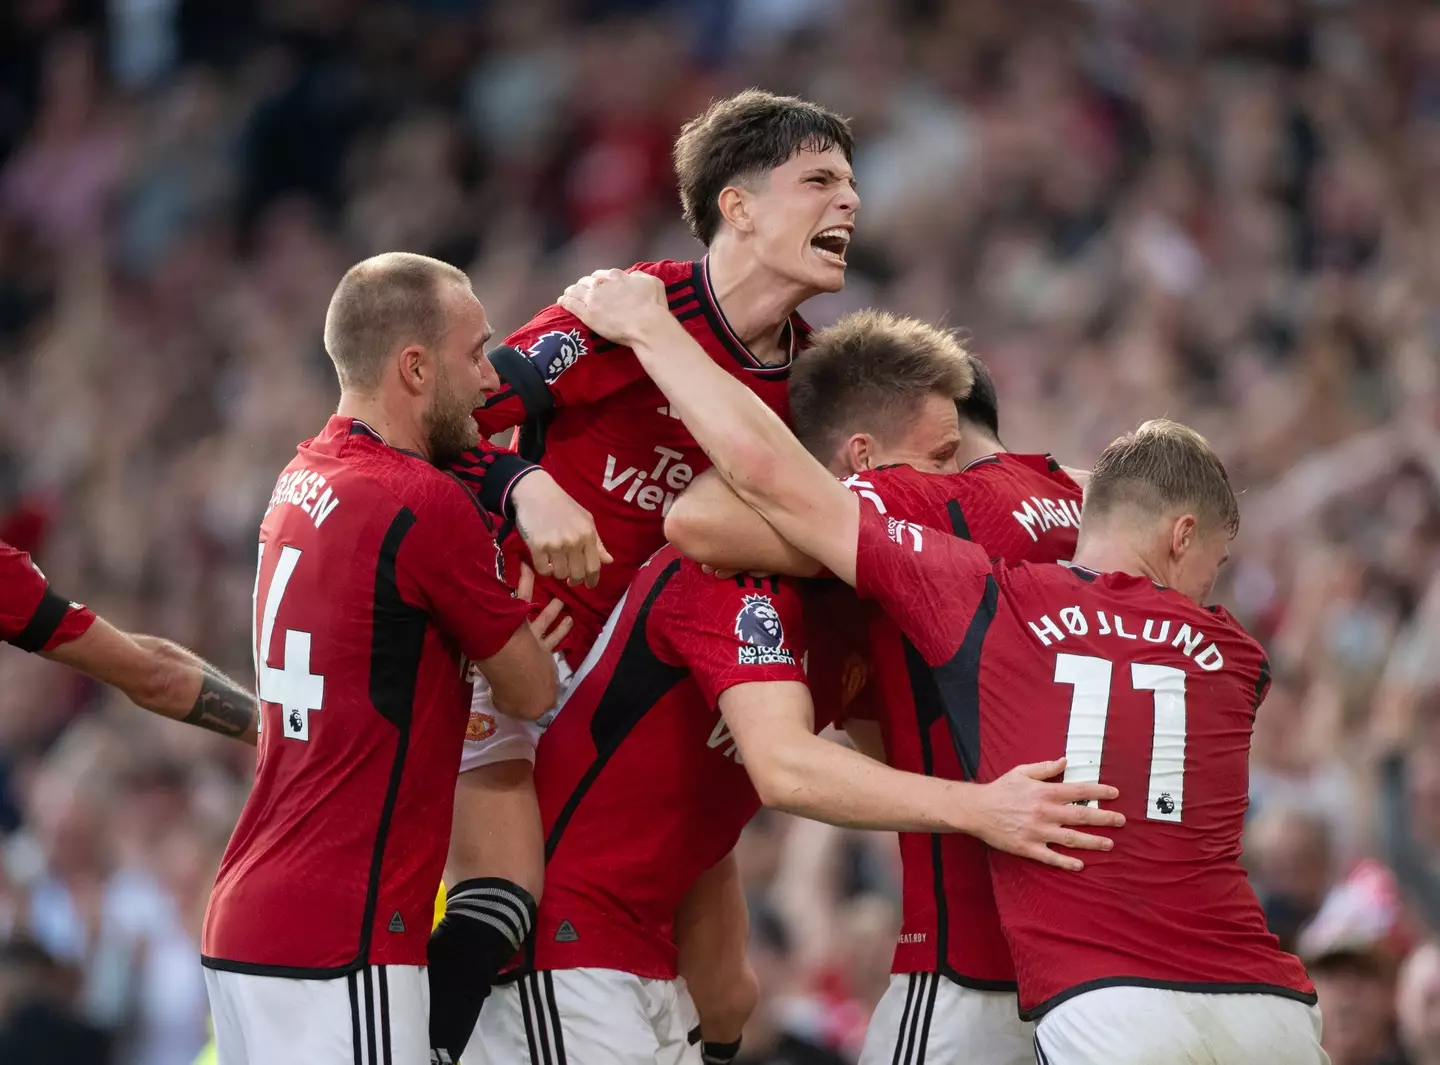 Manchester United players pile on Scott McTominay following his 97th minute winner. (